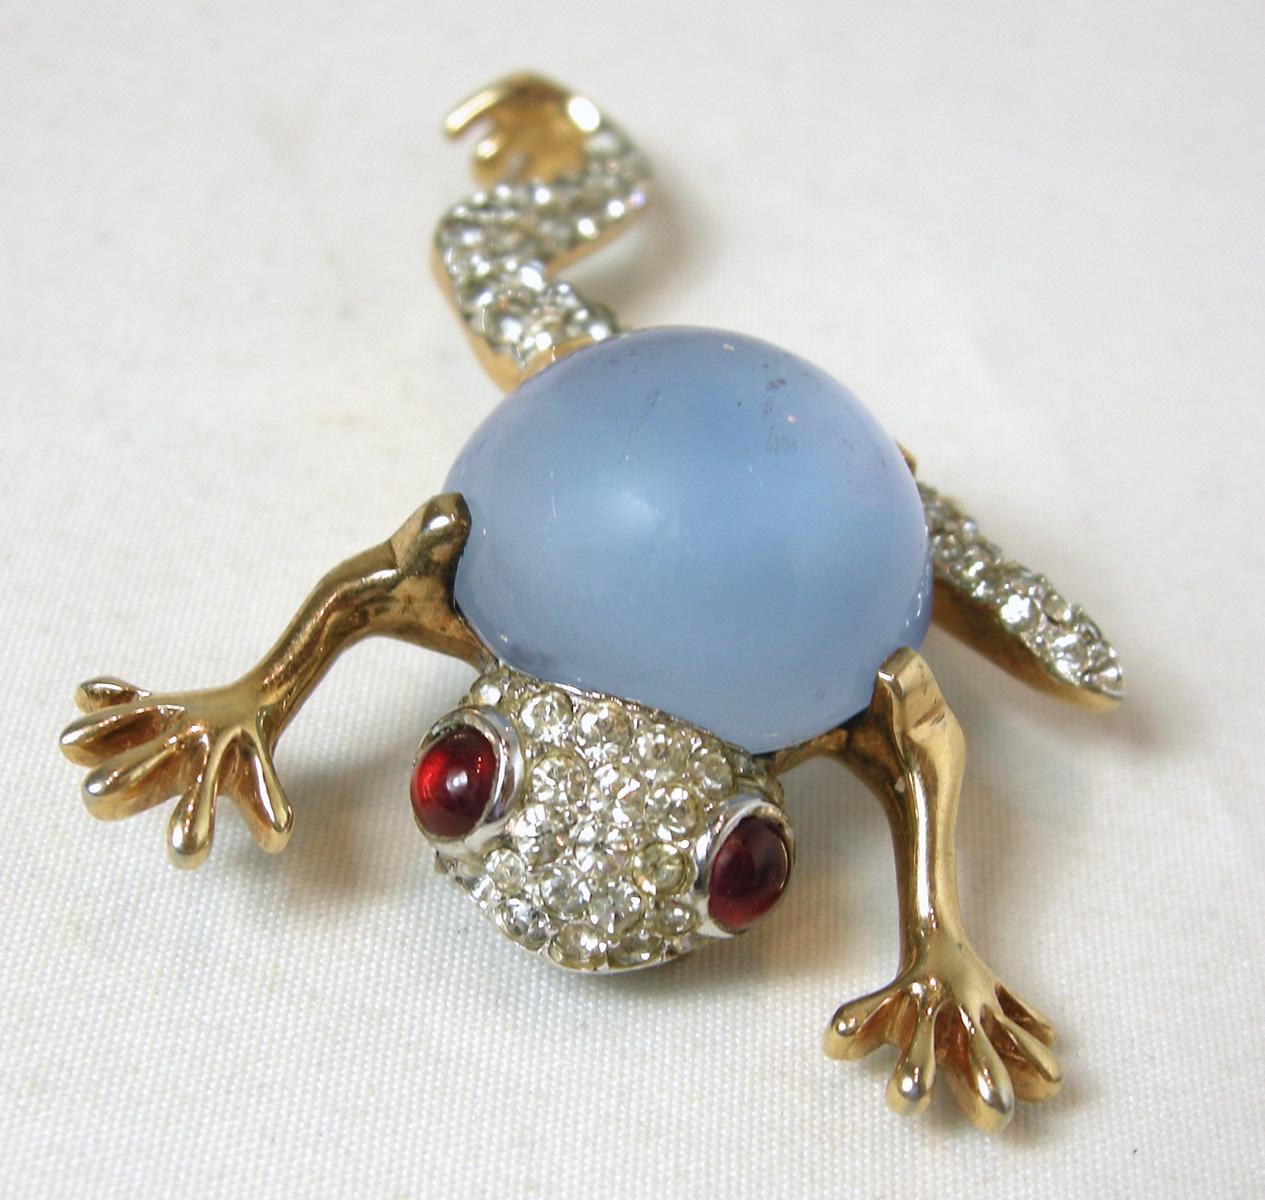 This is Mazer’s famous frog fur clip with the blue jelly belly body.  Its head and legs have clusters of clear rhinestones and its eyes have ruby crystals … all in a gold tone setting.  It is signed “Mazer” twice … on the clip and on its leg.  It